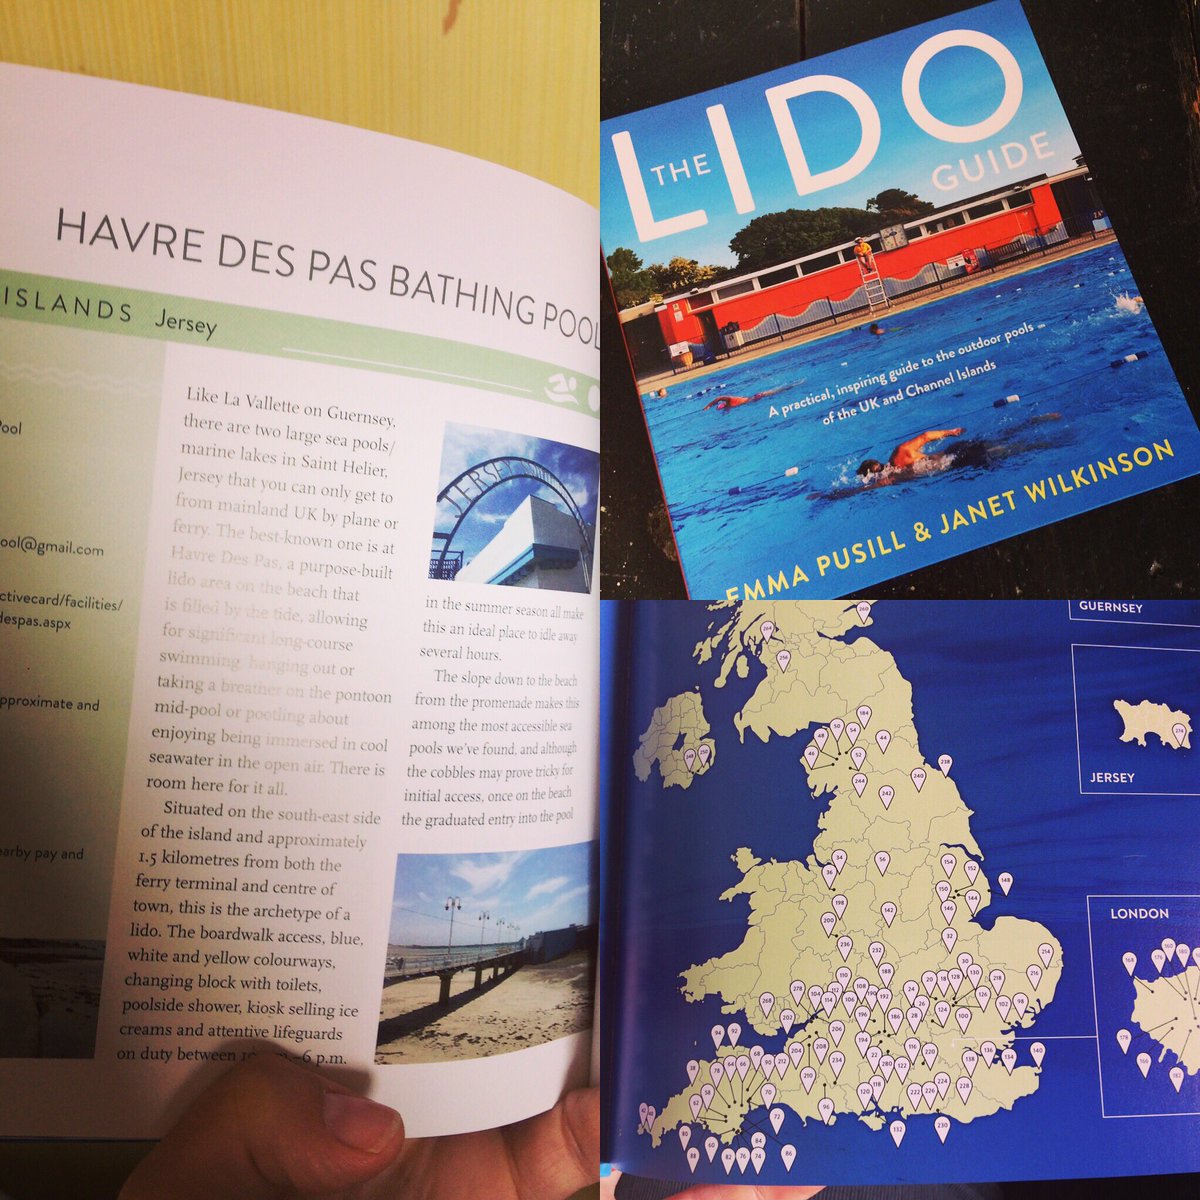 Got my @LidoGuide this morning! So chuffed!
#LetsGoSwimming